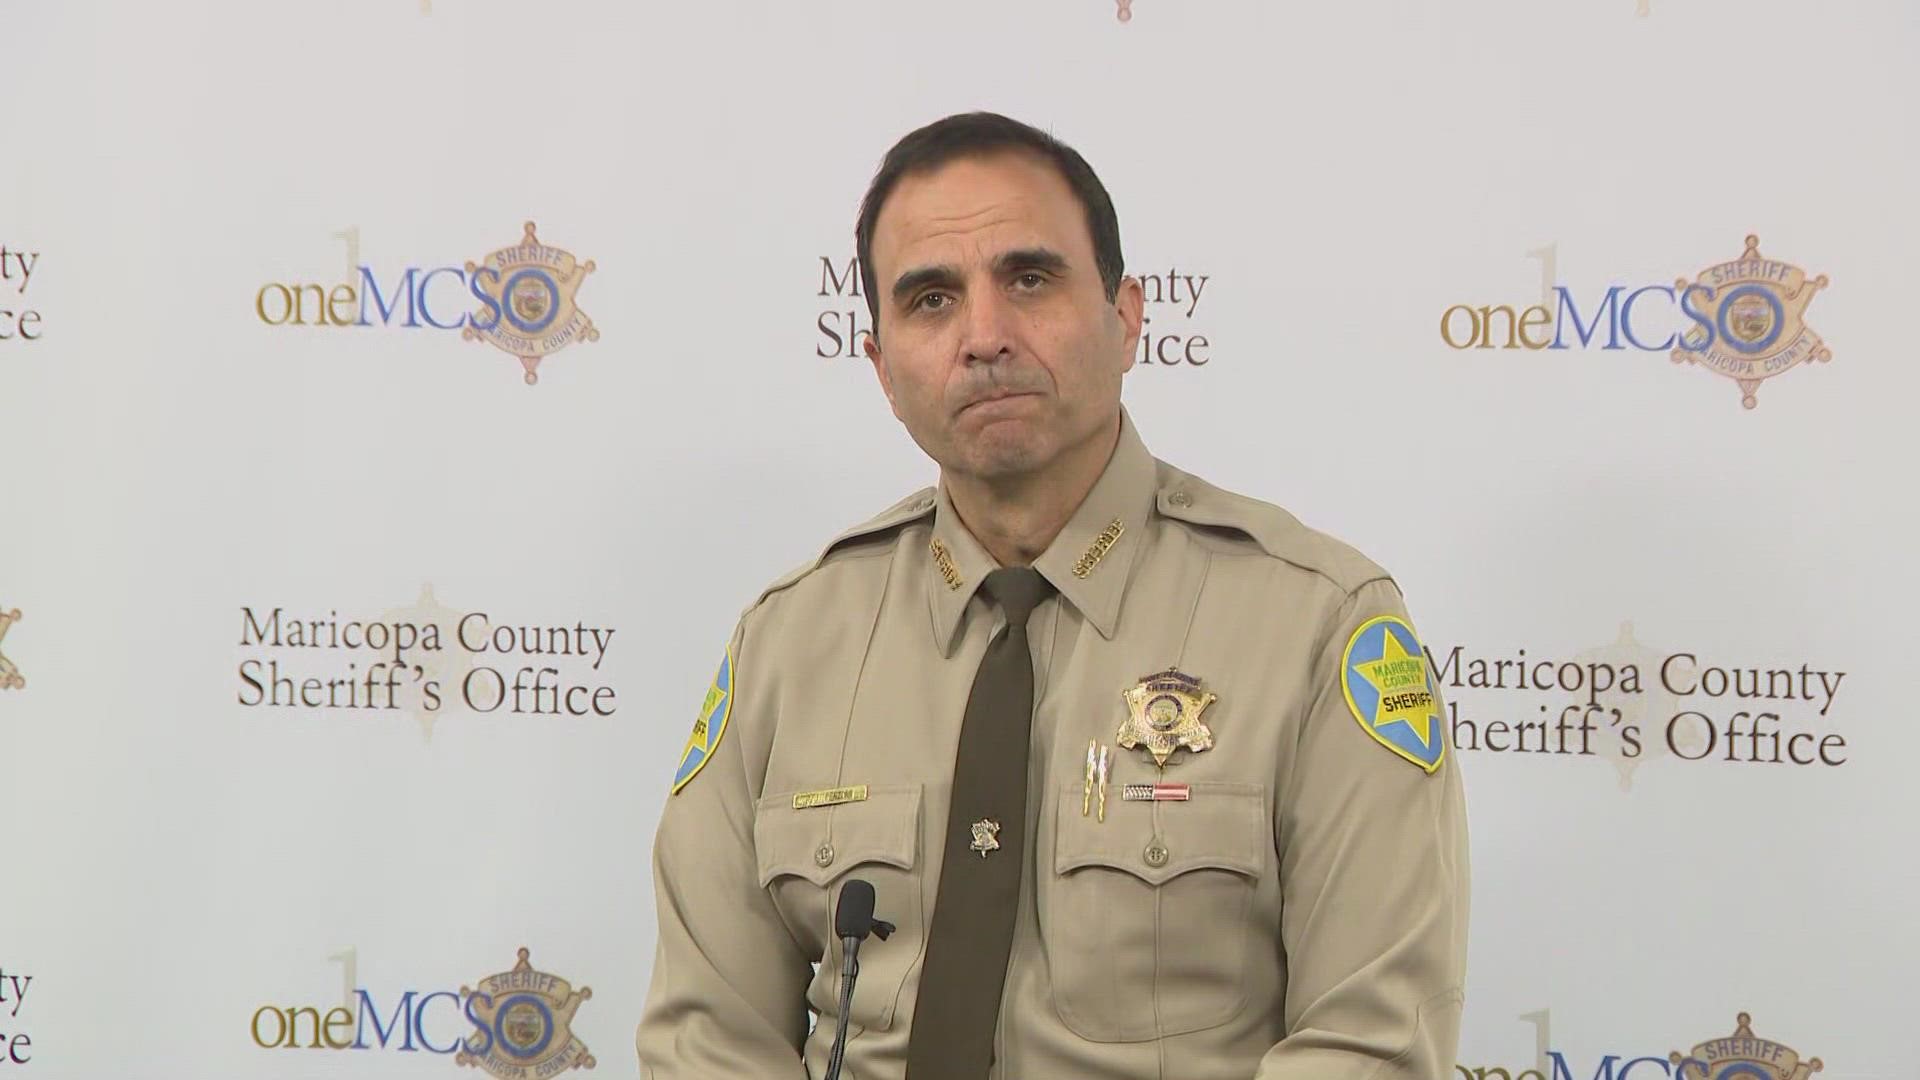 The sheriff said Monday some of the alleged threats made against local officials came from outside of Arizona.